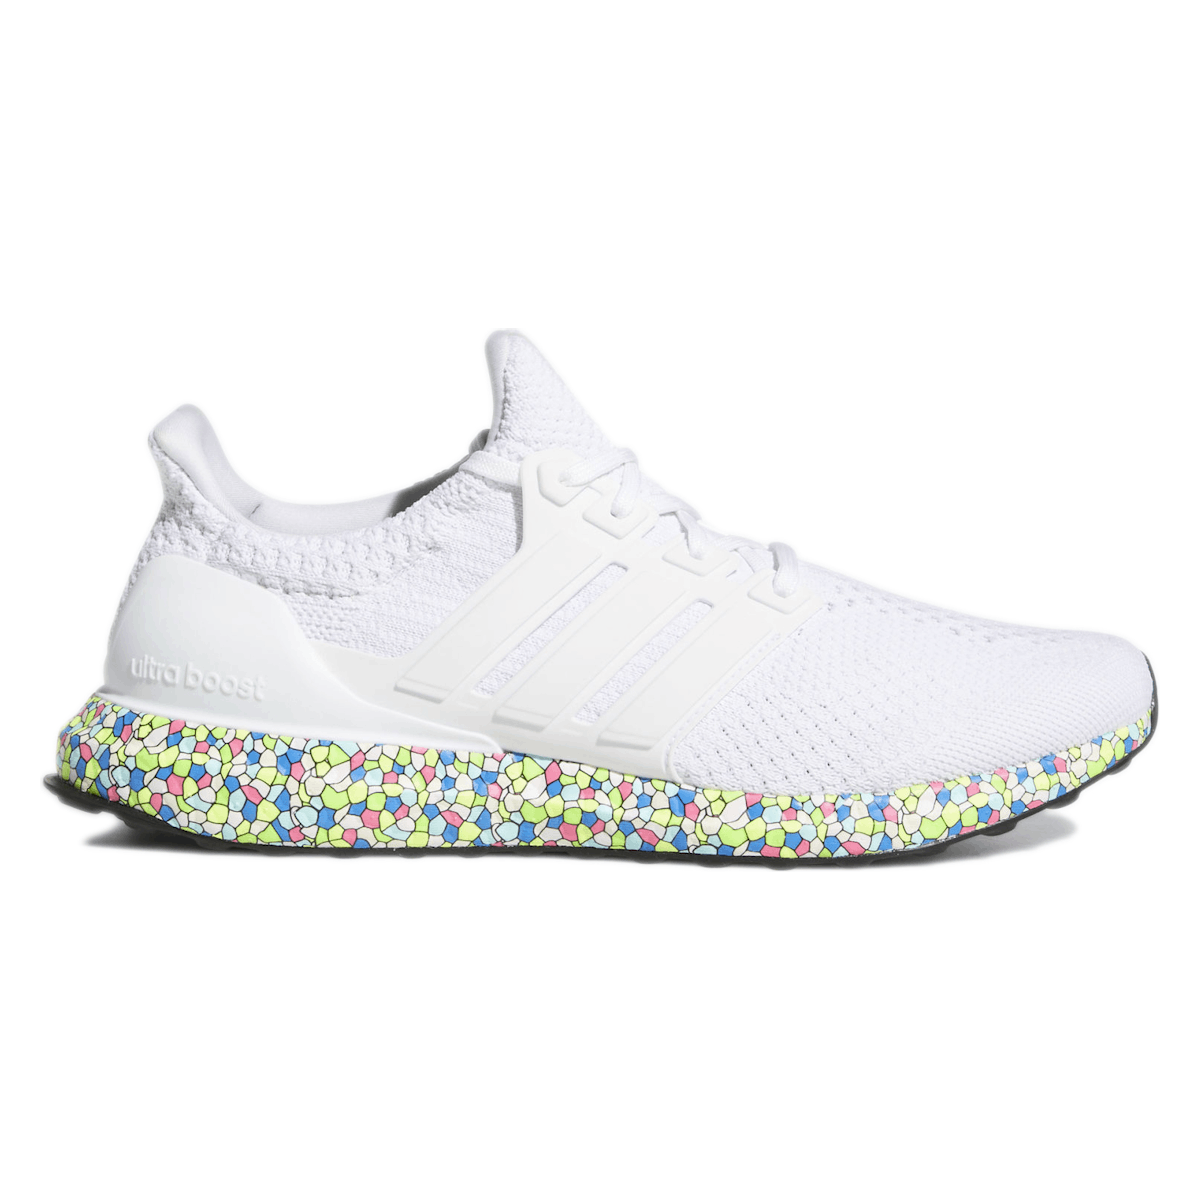 adidas Ultra Boost 5.0 DNA White Mosaic Boost